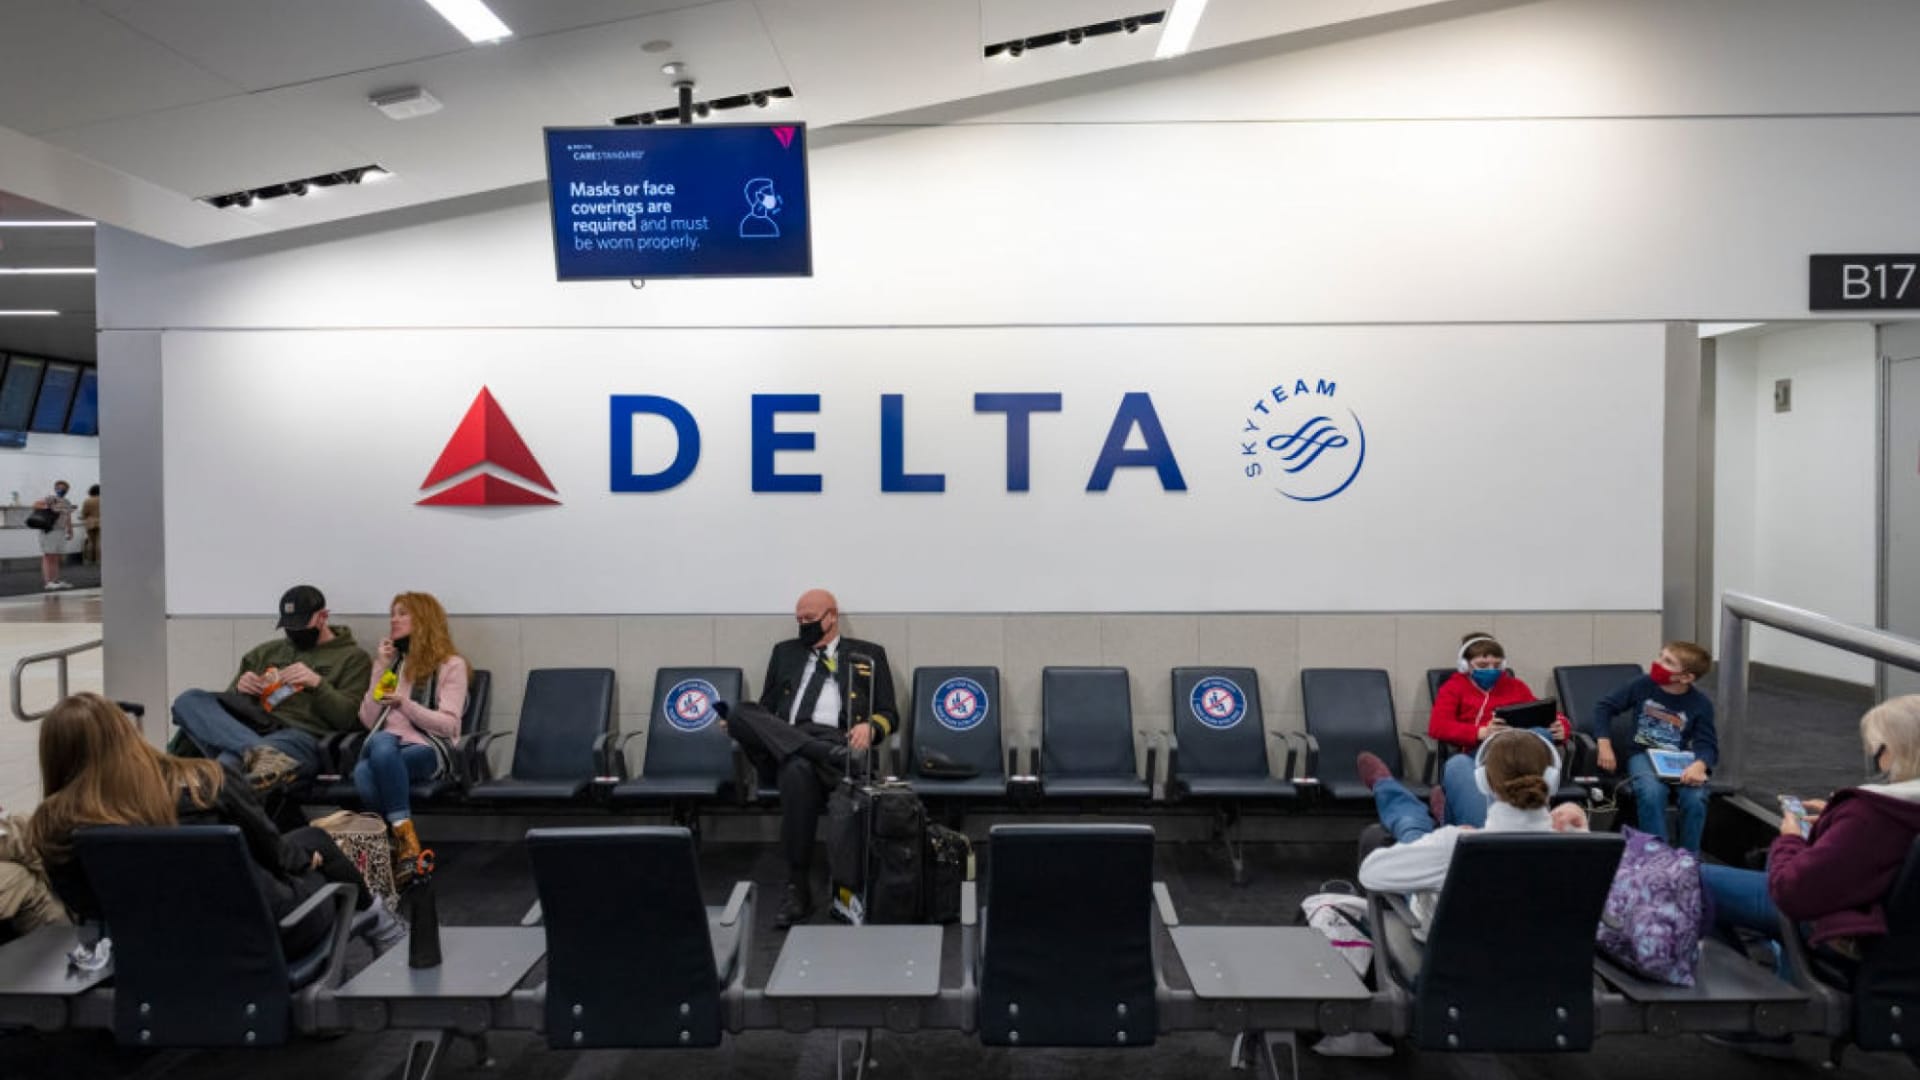 An Upset Customer Tweeted at Delta Air Lines. Its Response Was the 1 Thing No Company Should Ever Do